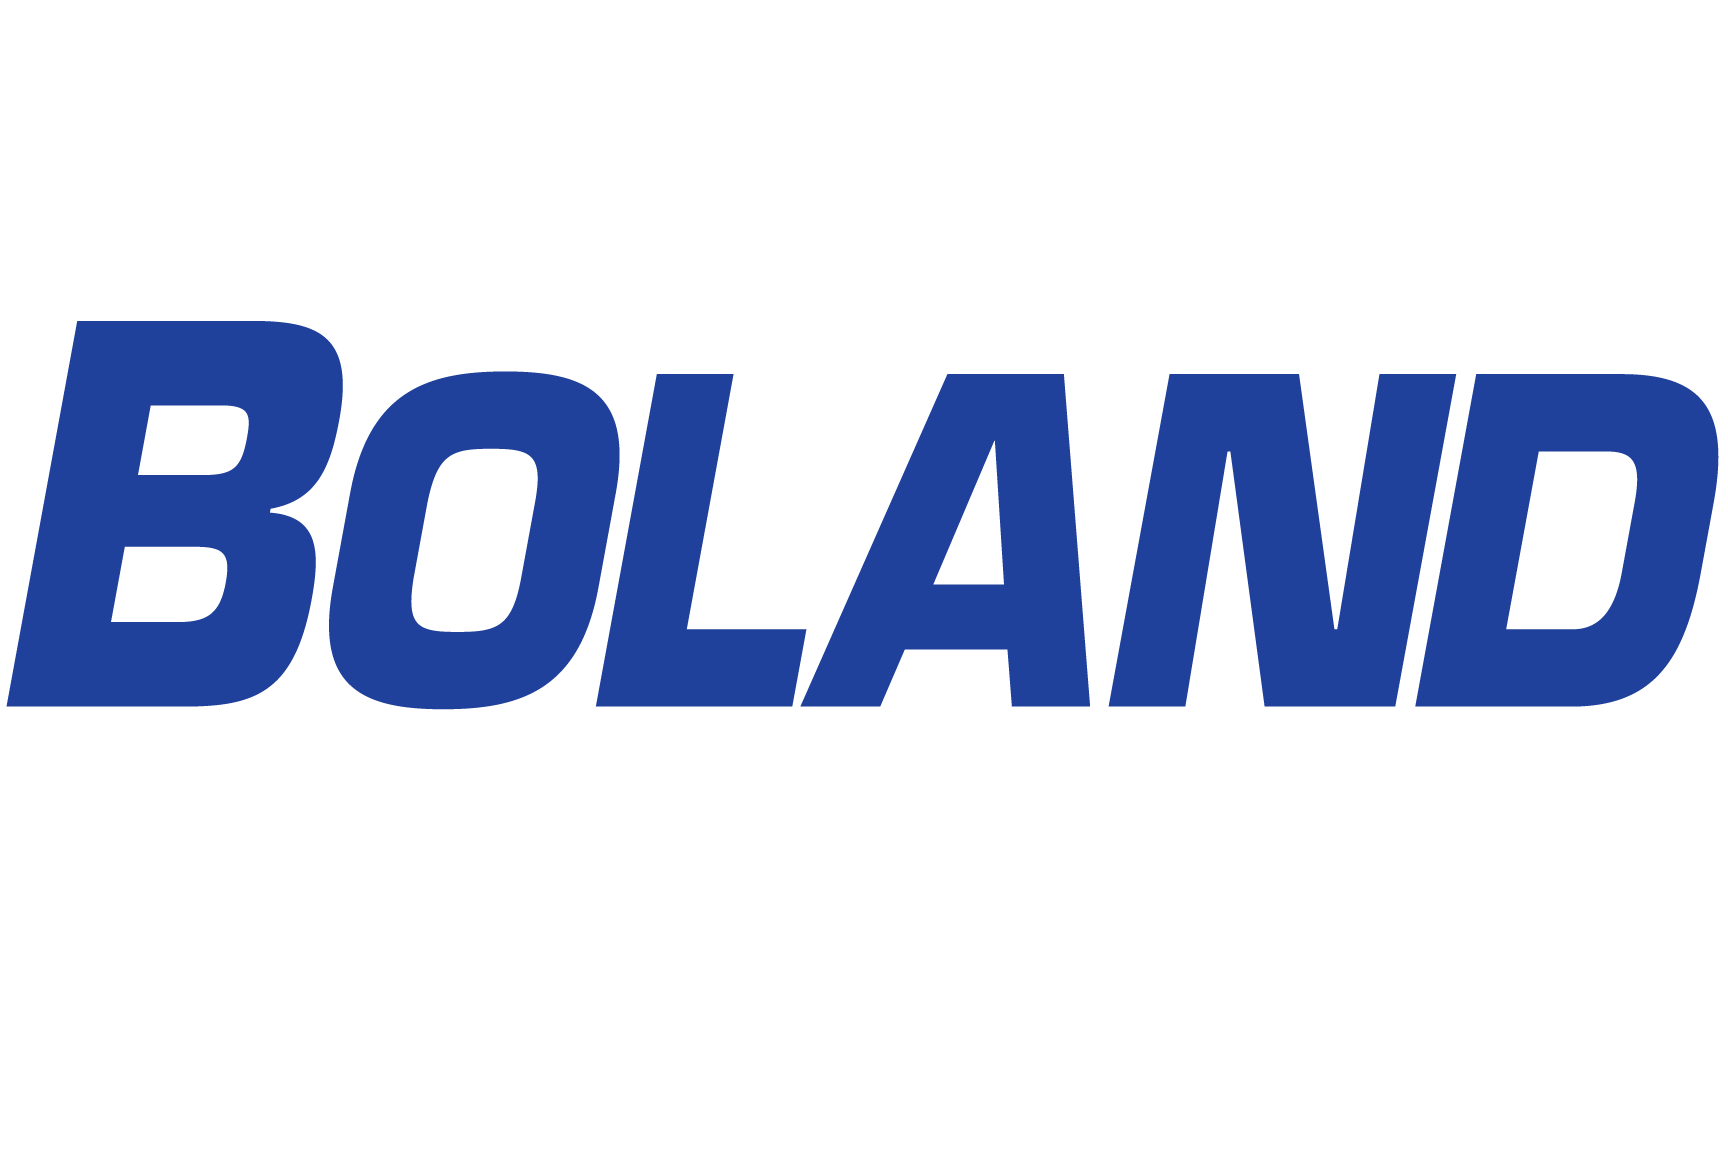 GoFormz & Boland increased HVAC project efficiency digitizing their paper forms